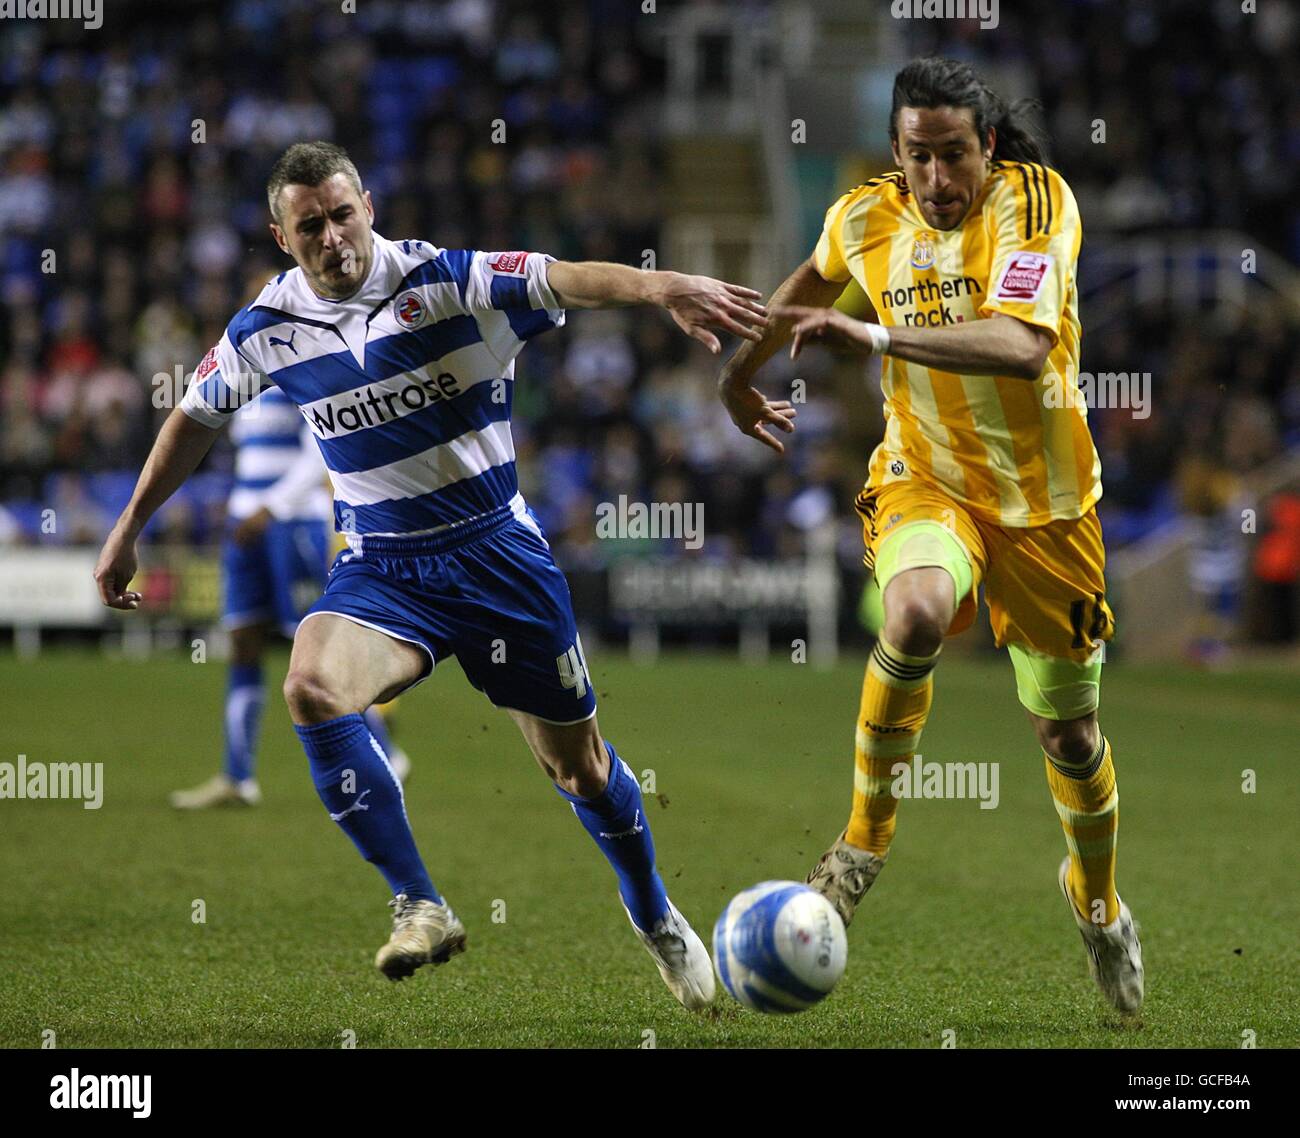 Soccer - Coca-Cola Football League Championship - Reading v Newcastle United - Madejski Stadium. Reading's Andy Griffin (left) and Newcastle United's Jonas Gutierrez (right) battle for the ball Stock Photo